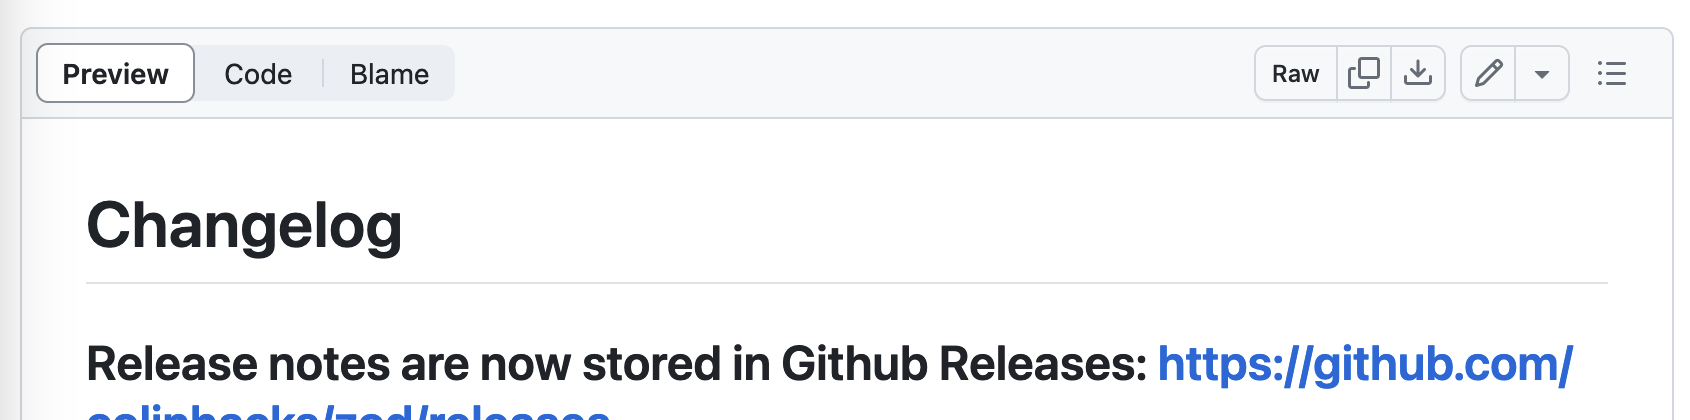 Example of Github repository changelog.md stating that "Release notes are now stored in Github Releases"